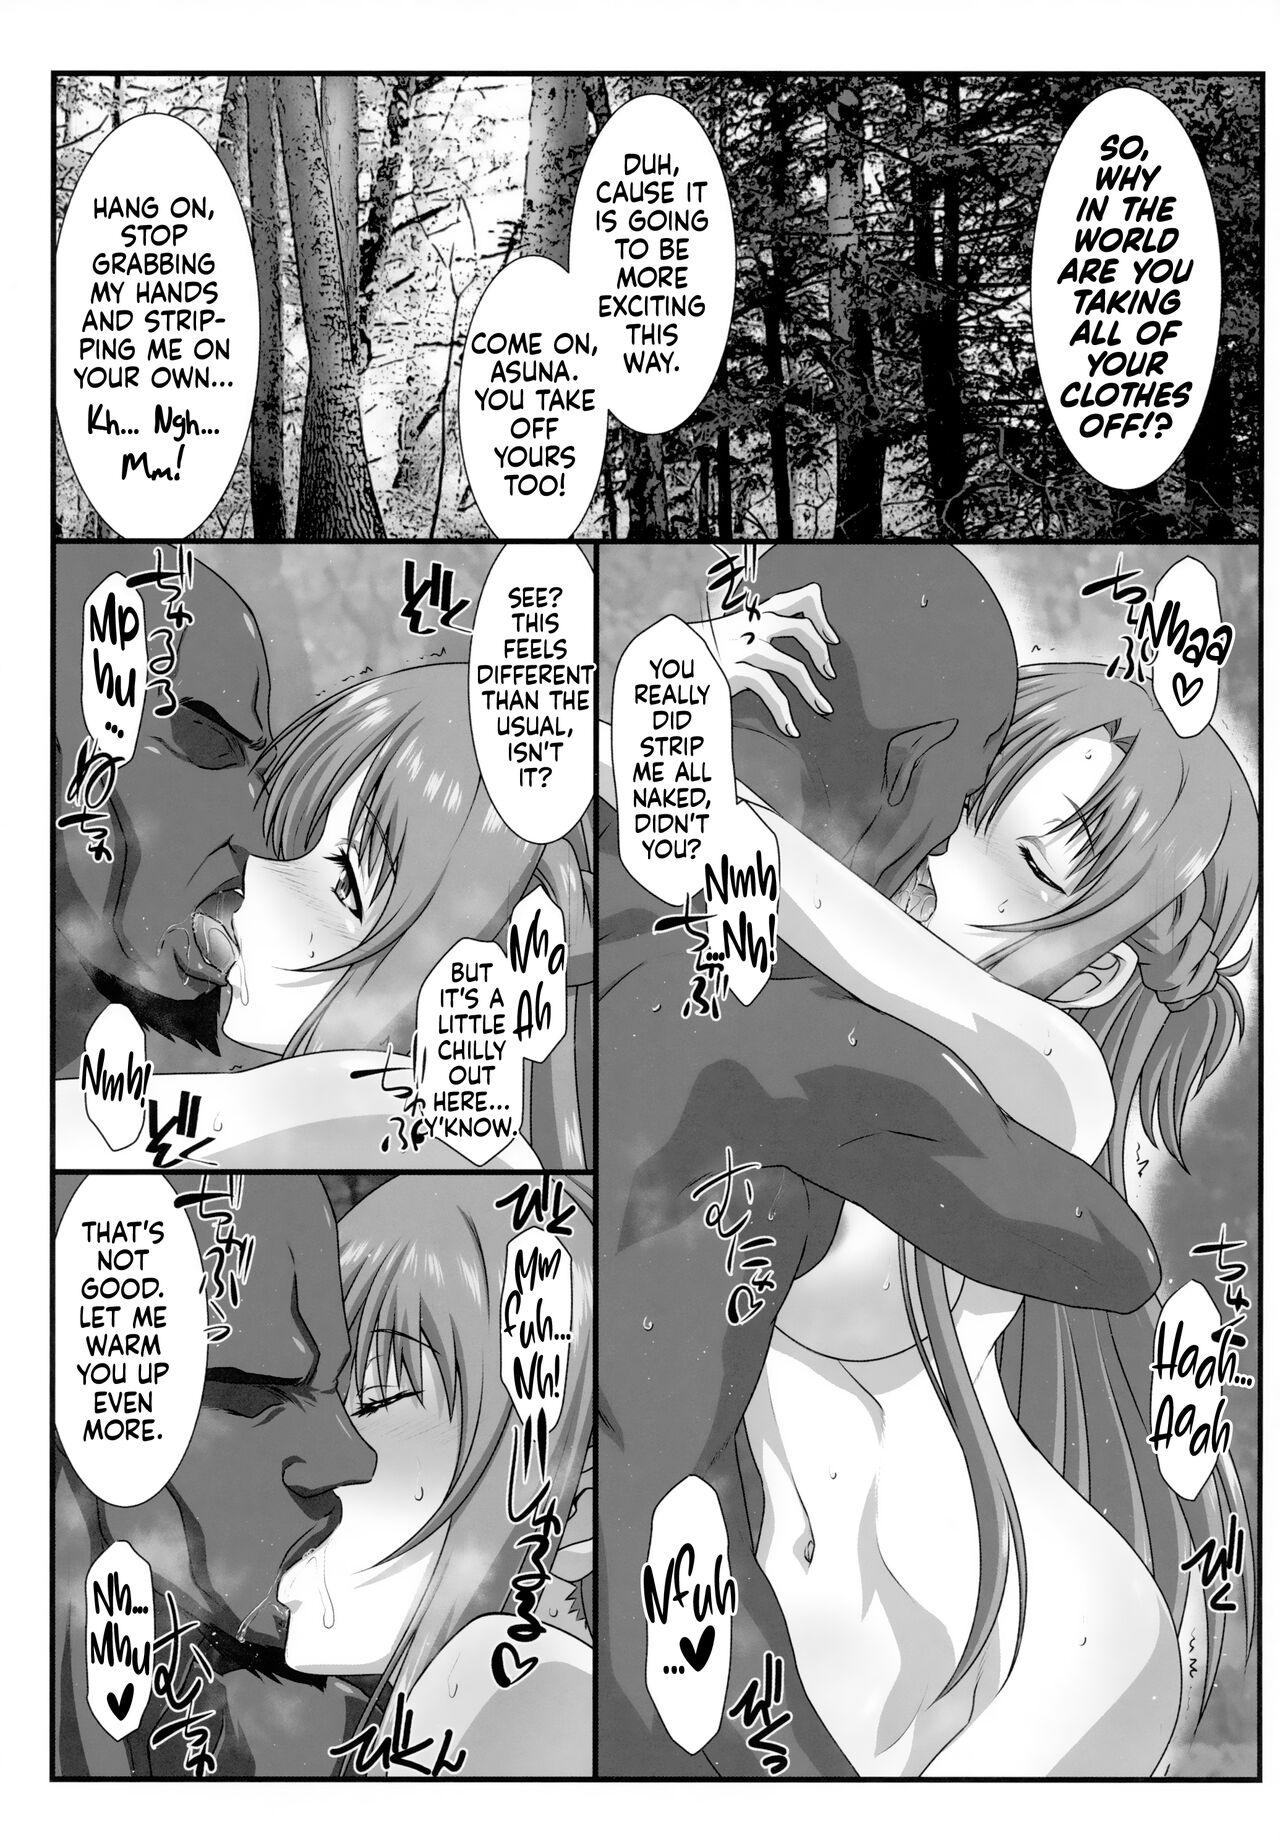 Nudity Astral Bout Ver. 45 - Sword art online Pussy Fingering - Page 4